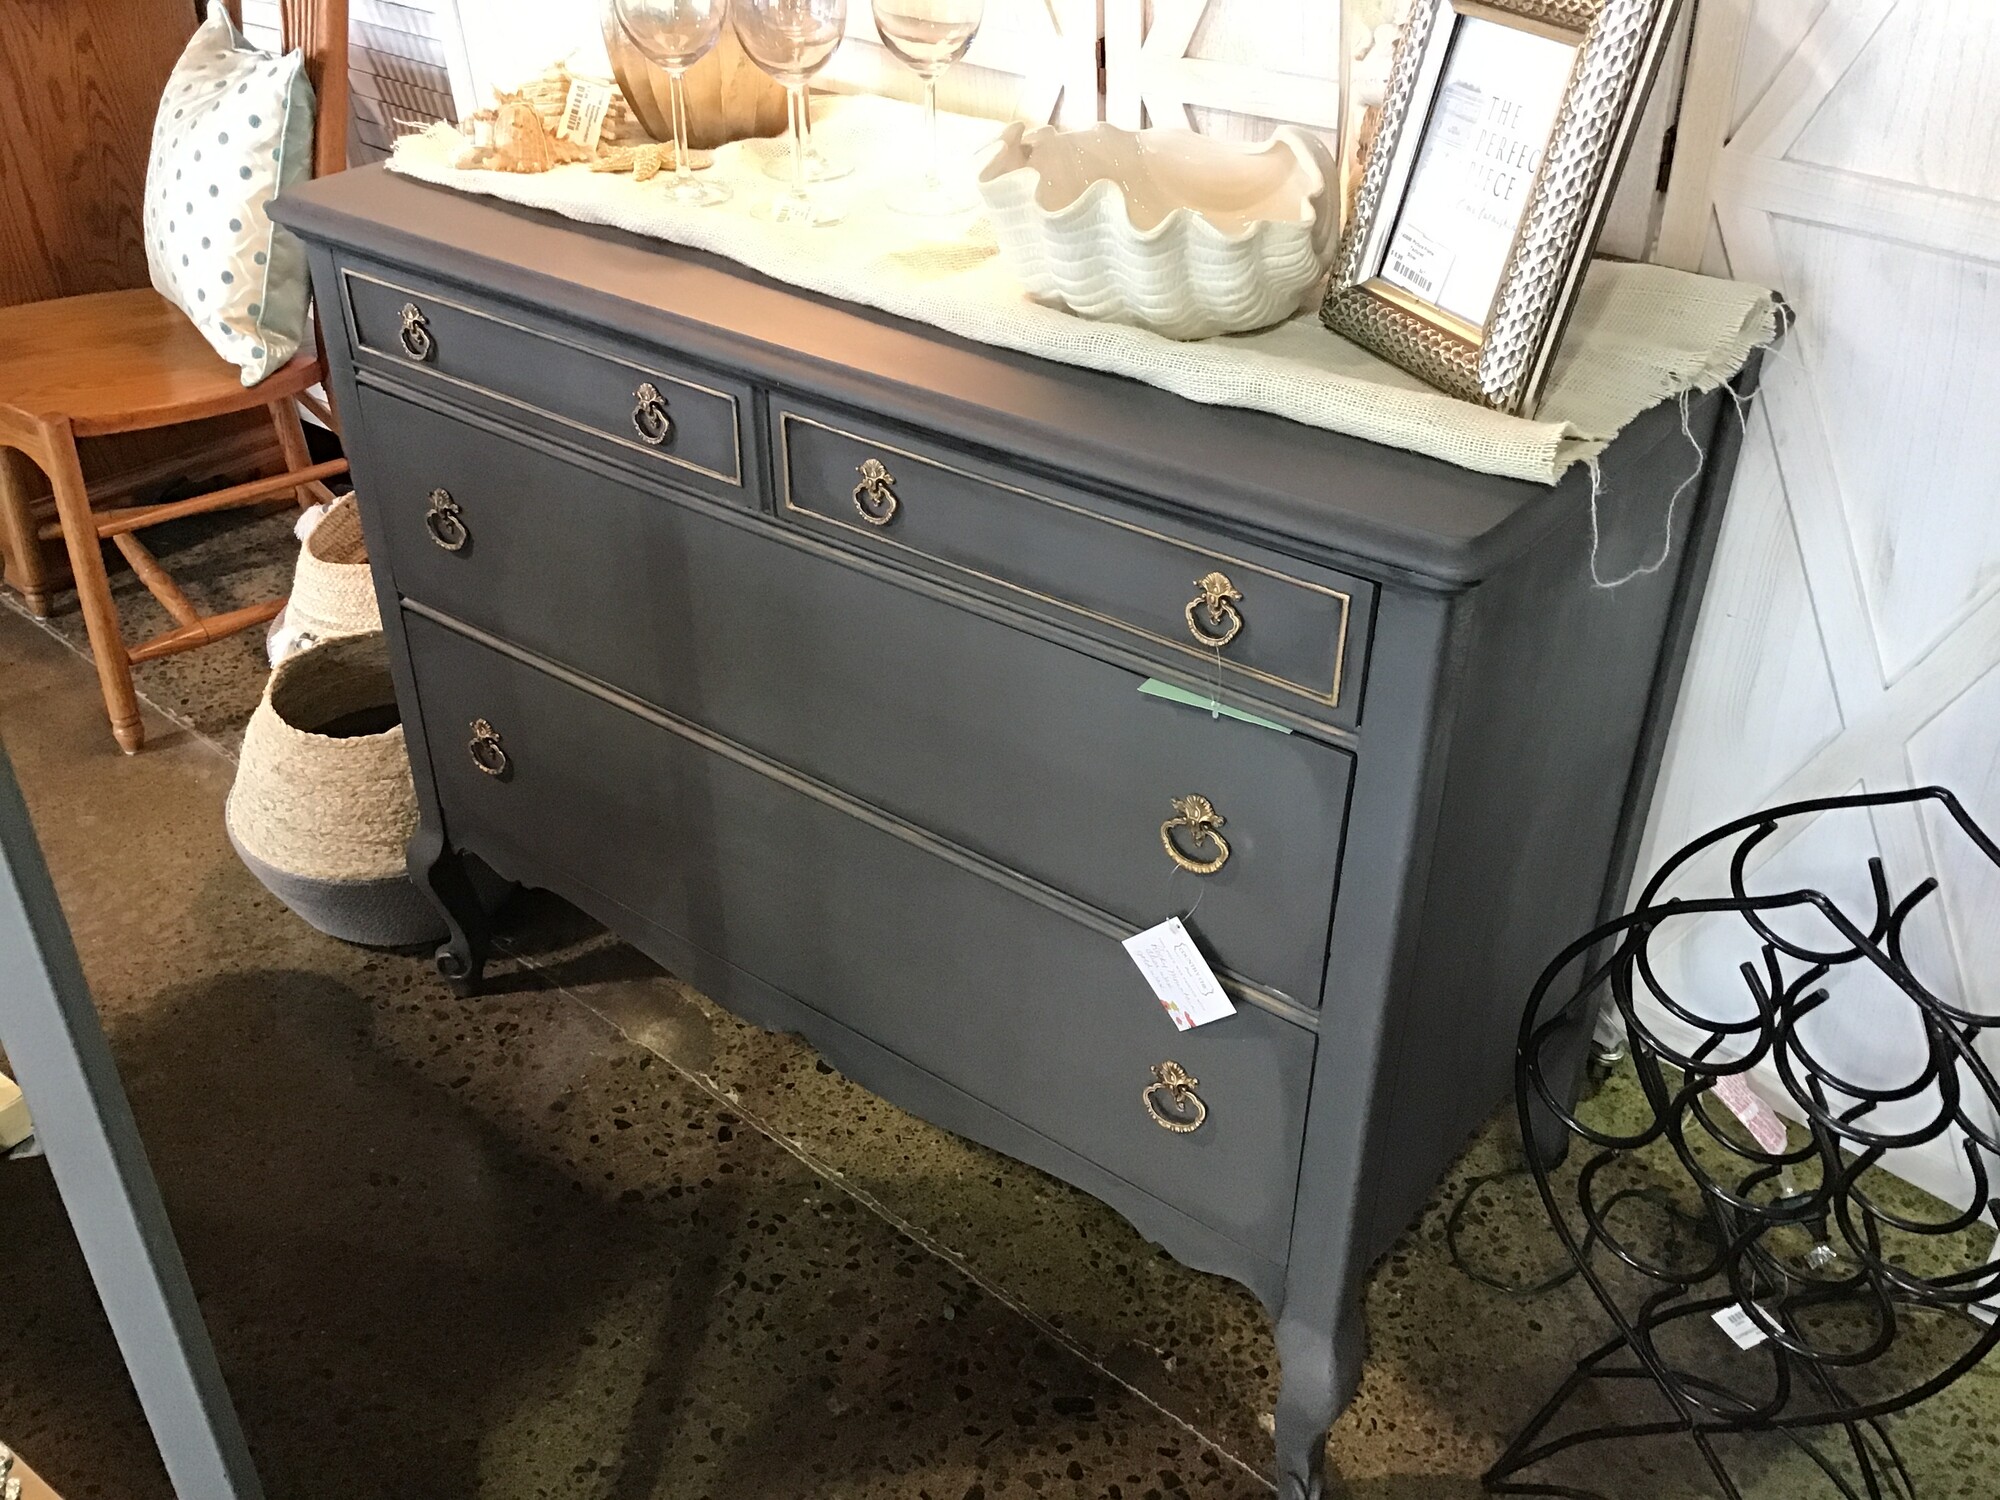 This beautifully updated vintage dresser was painted by one of our local artists using Country Chics Rocky Mountain paint. She used clear wax as a protectant and gold wax for highlights. The hardware was also updated to a gold finish. It has 4 drawers, which all move in and out smoothly. Great accent piece for any room!
Dimensions are 44 in x 22 in x 35 in